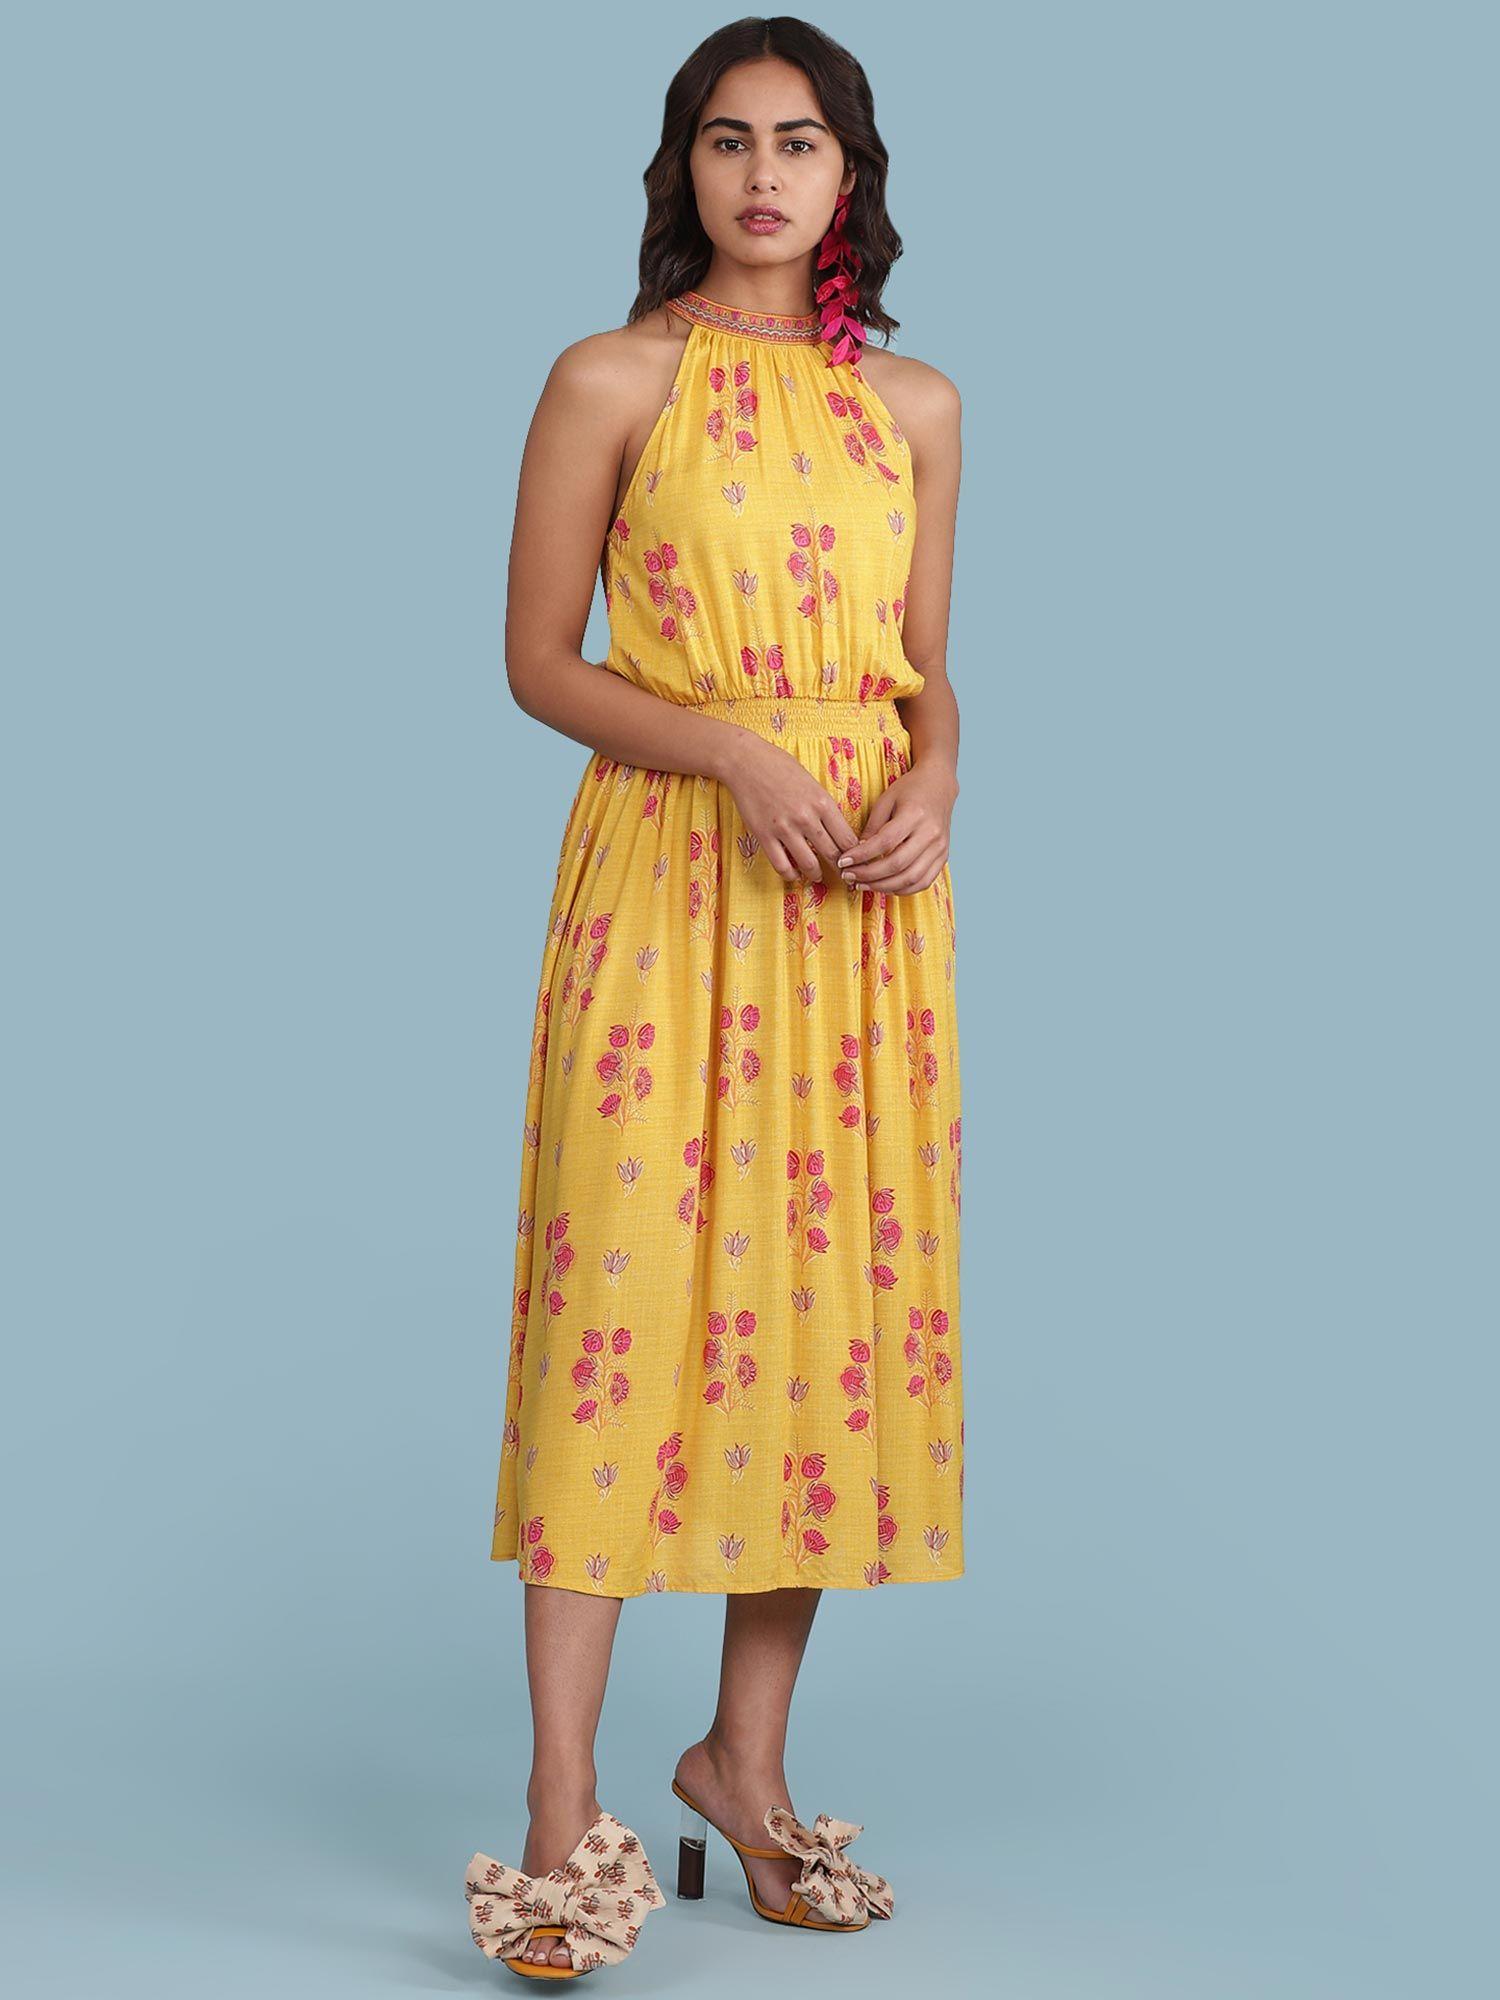 embroidered-halter-neck-printed-short-dress-with-smocking-at-waist